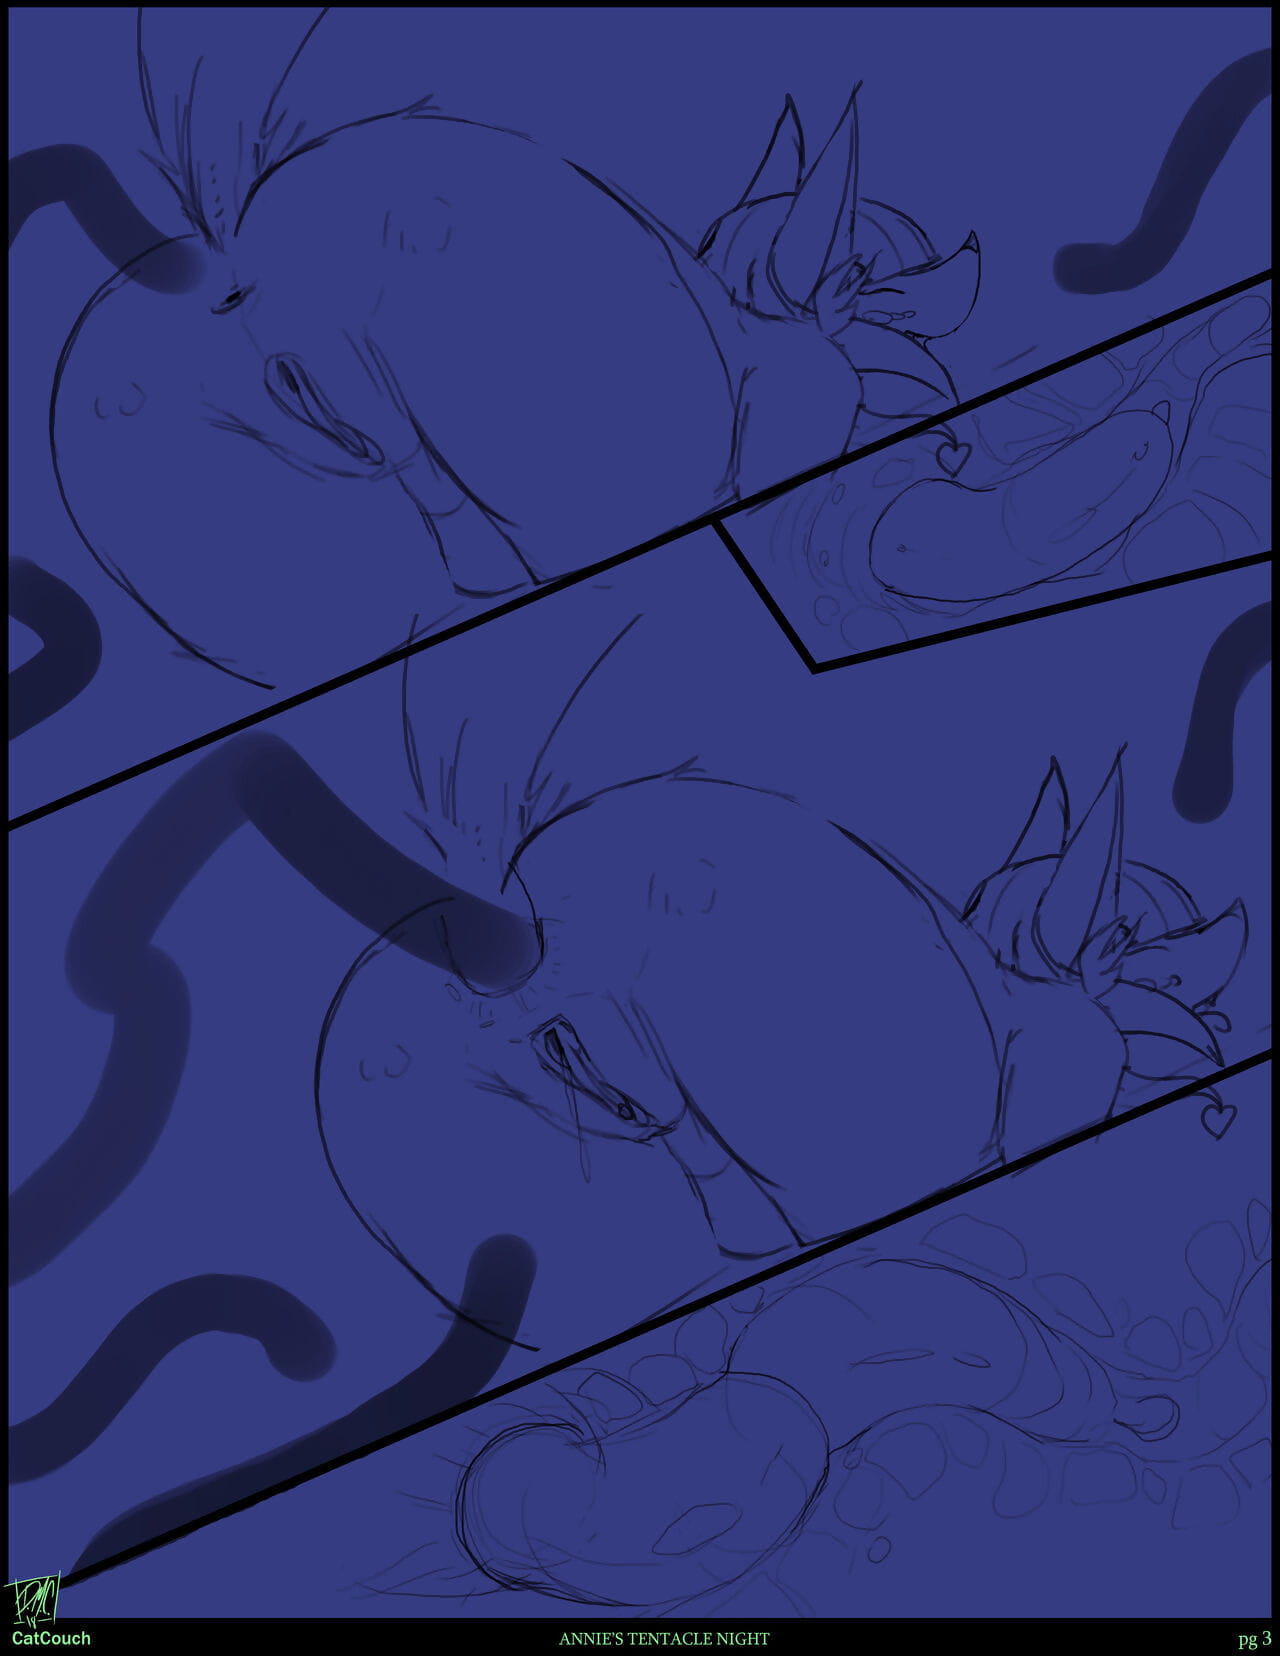 Annie Tentacle Night Comic page 1